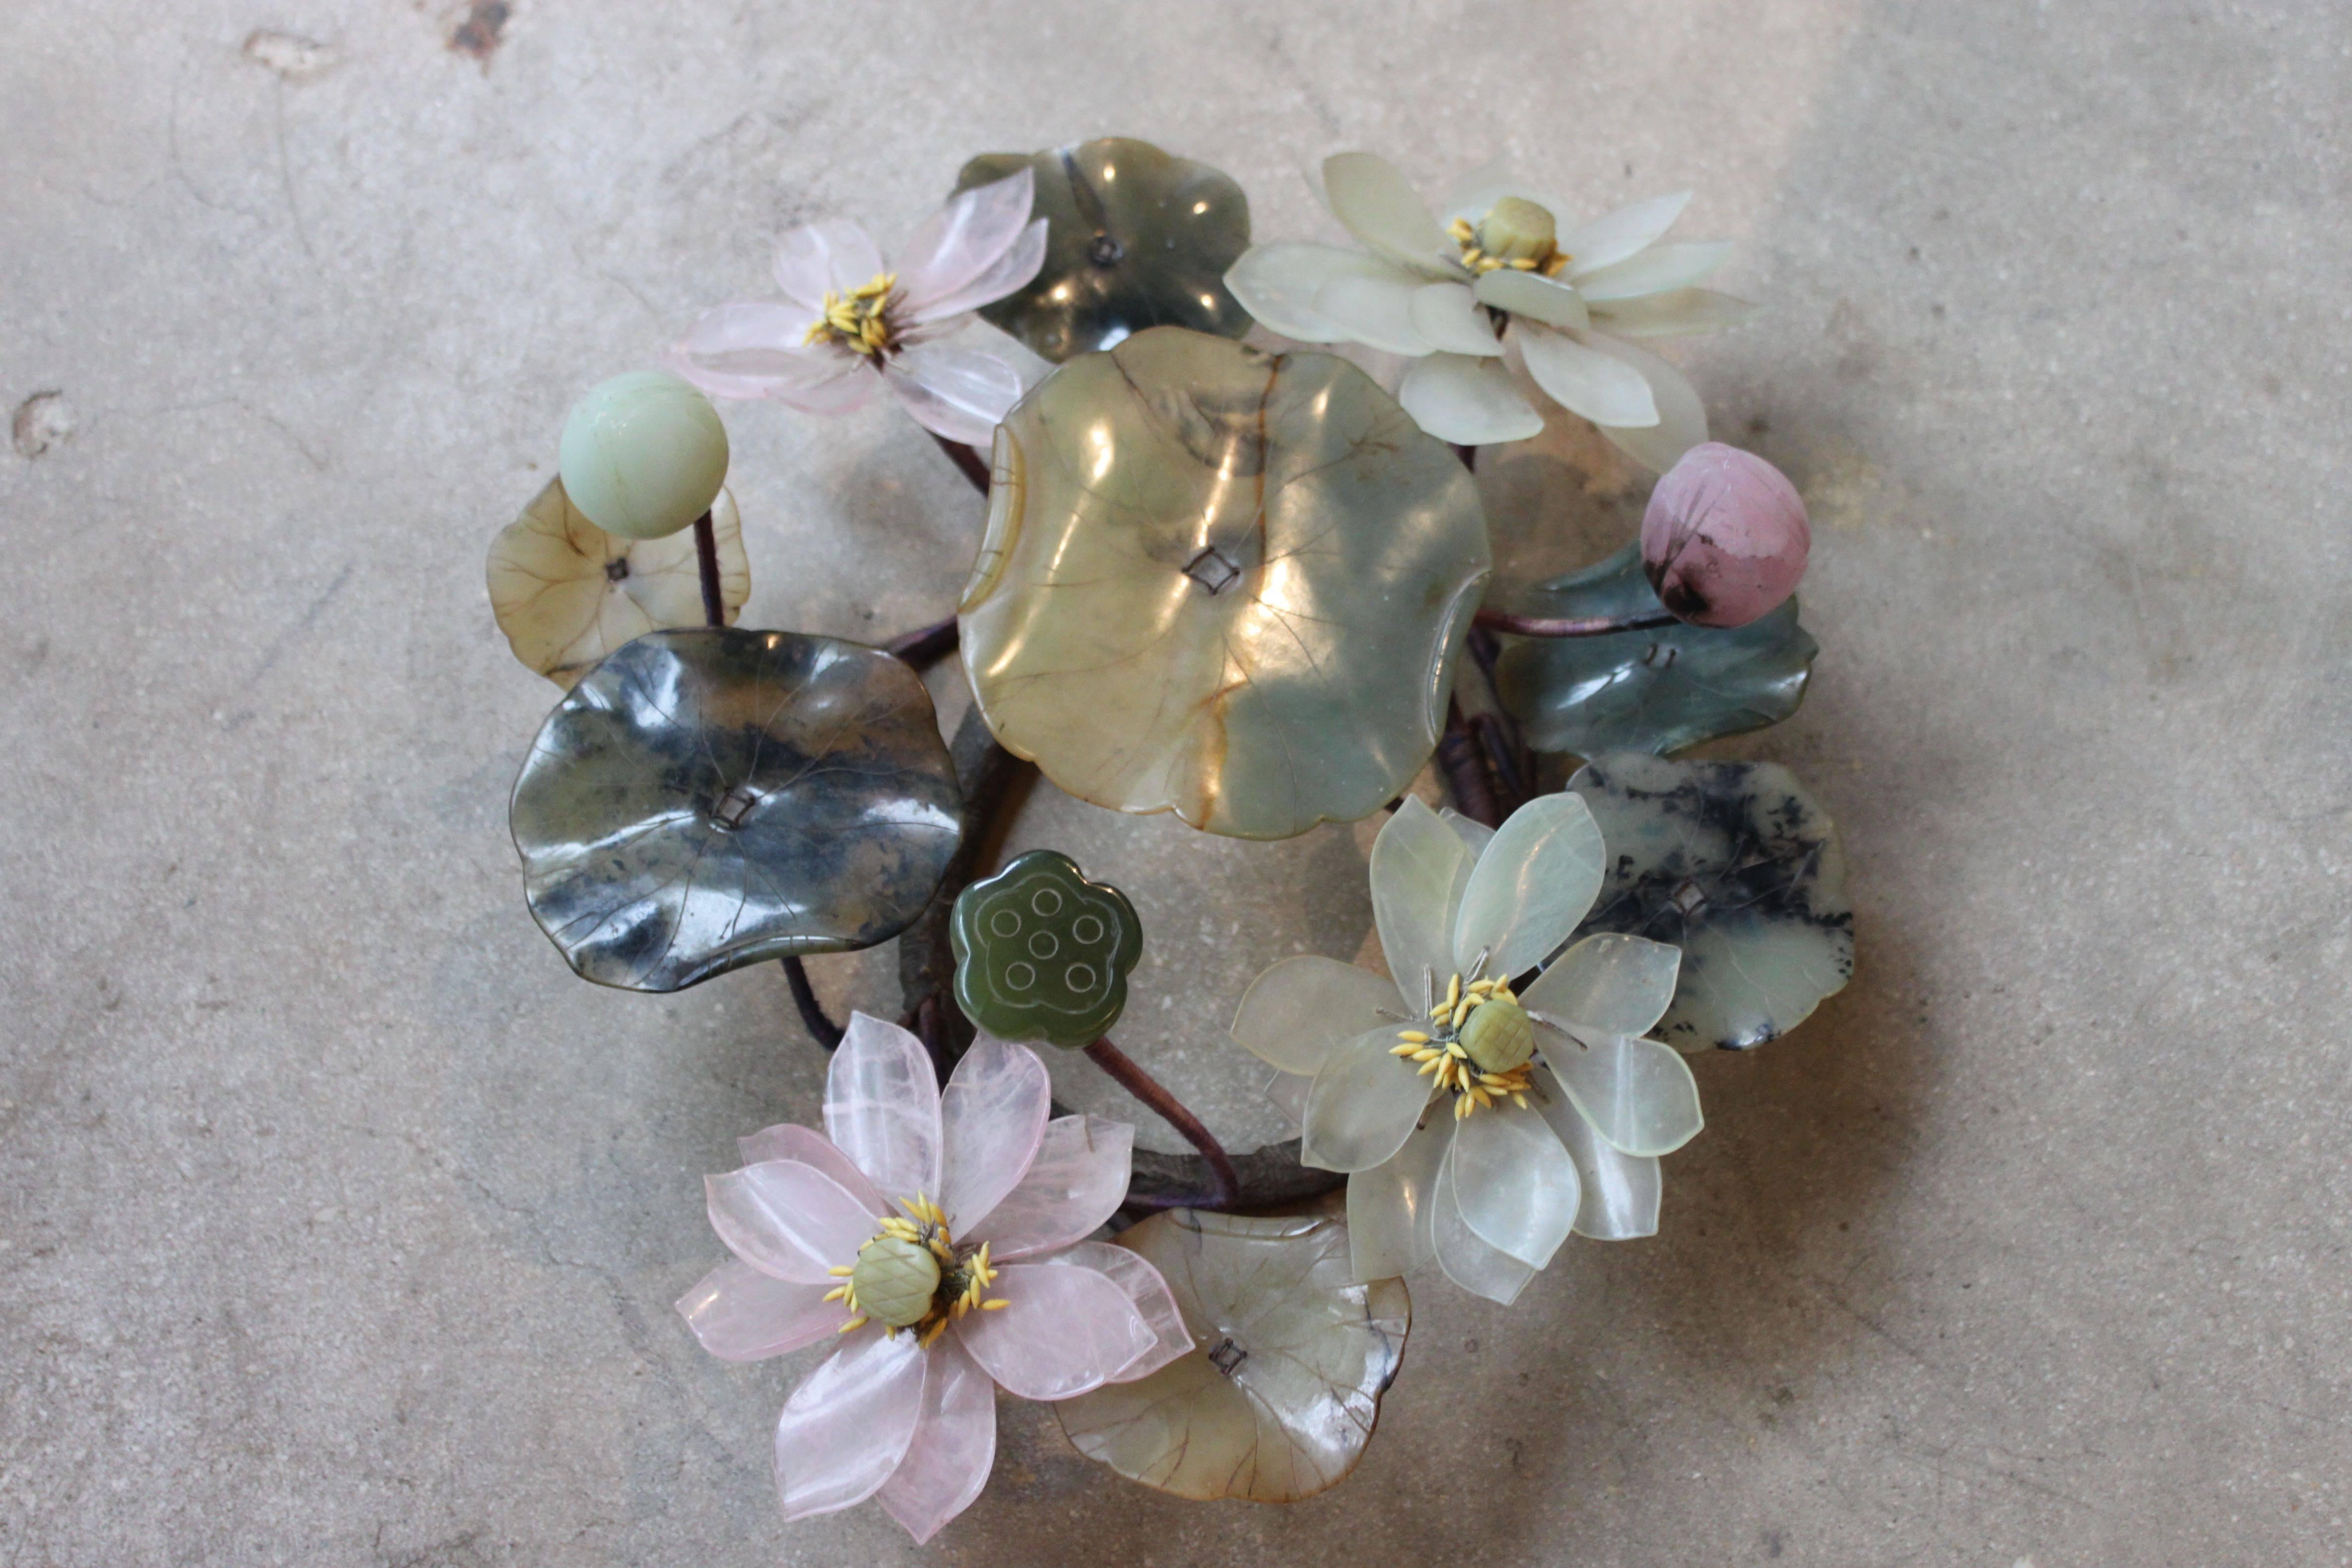 Lovely hard stone sculpture of flowers and water lilies. Also included are lotus pods and lily pads of varying shades of greens, pinks and creams. Unusually large size with a great degree of detailing.